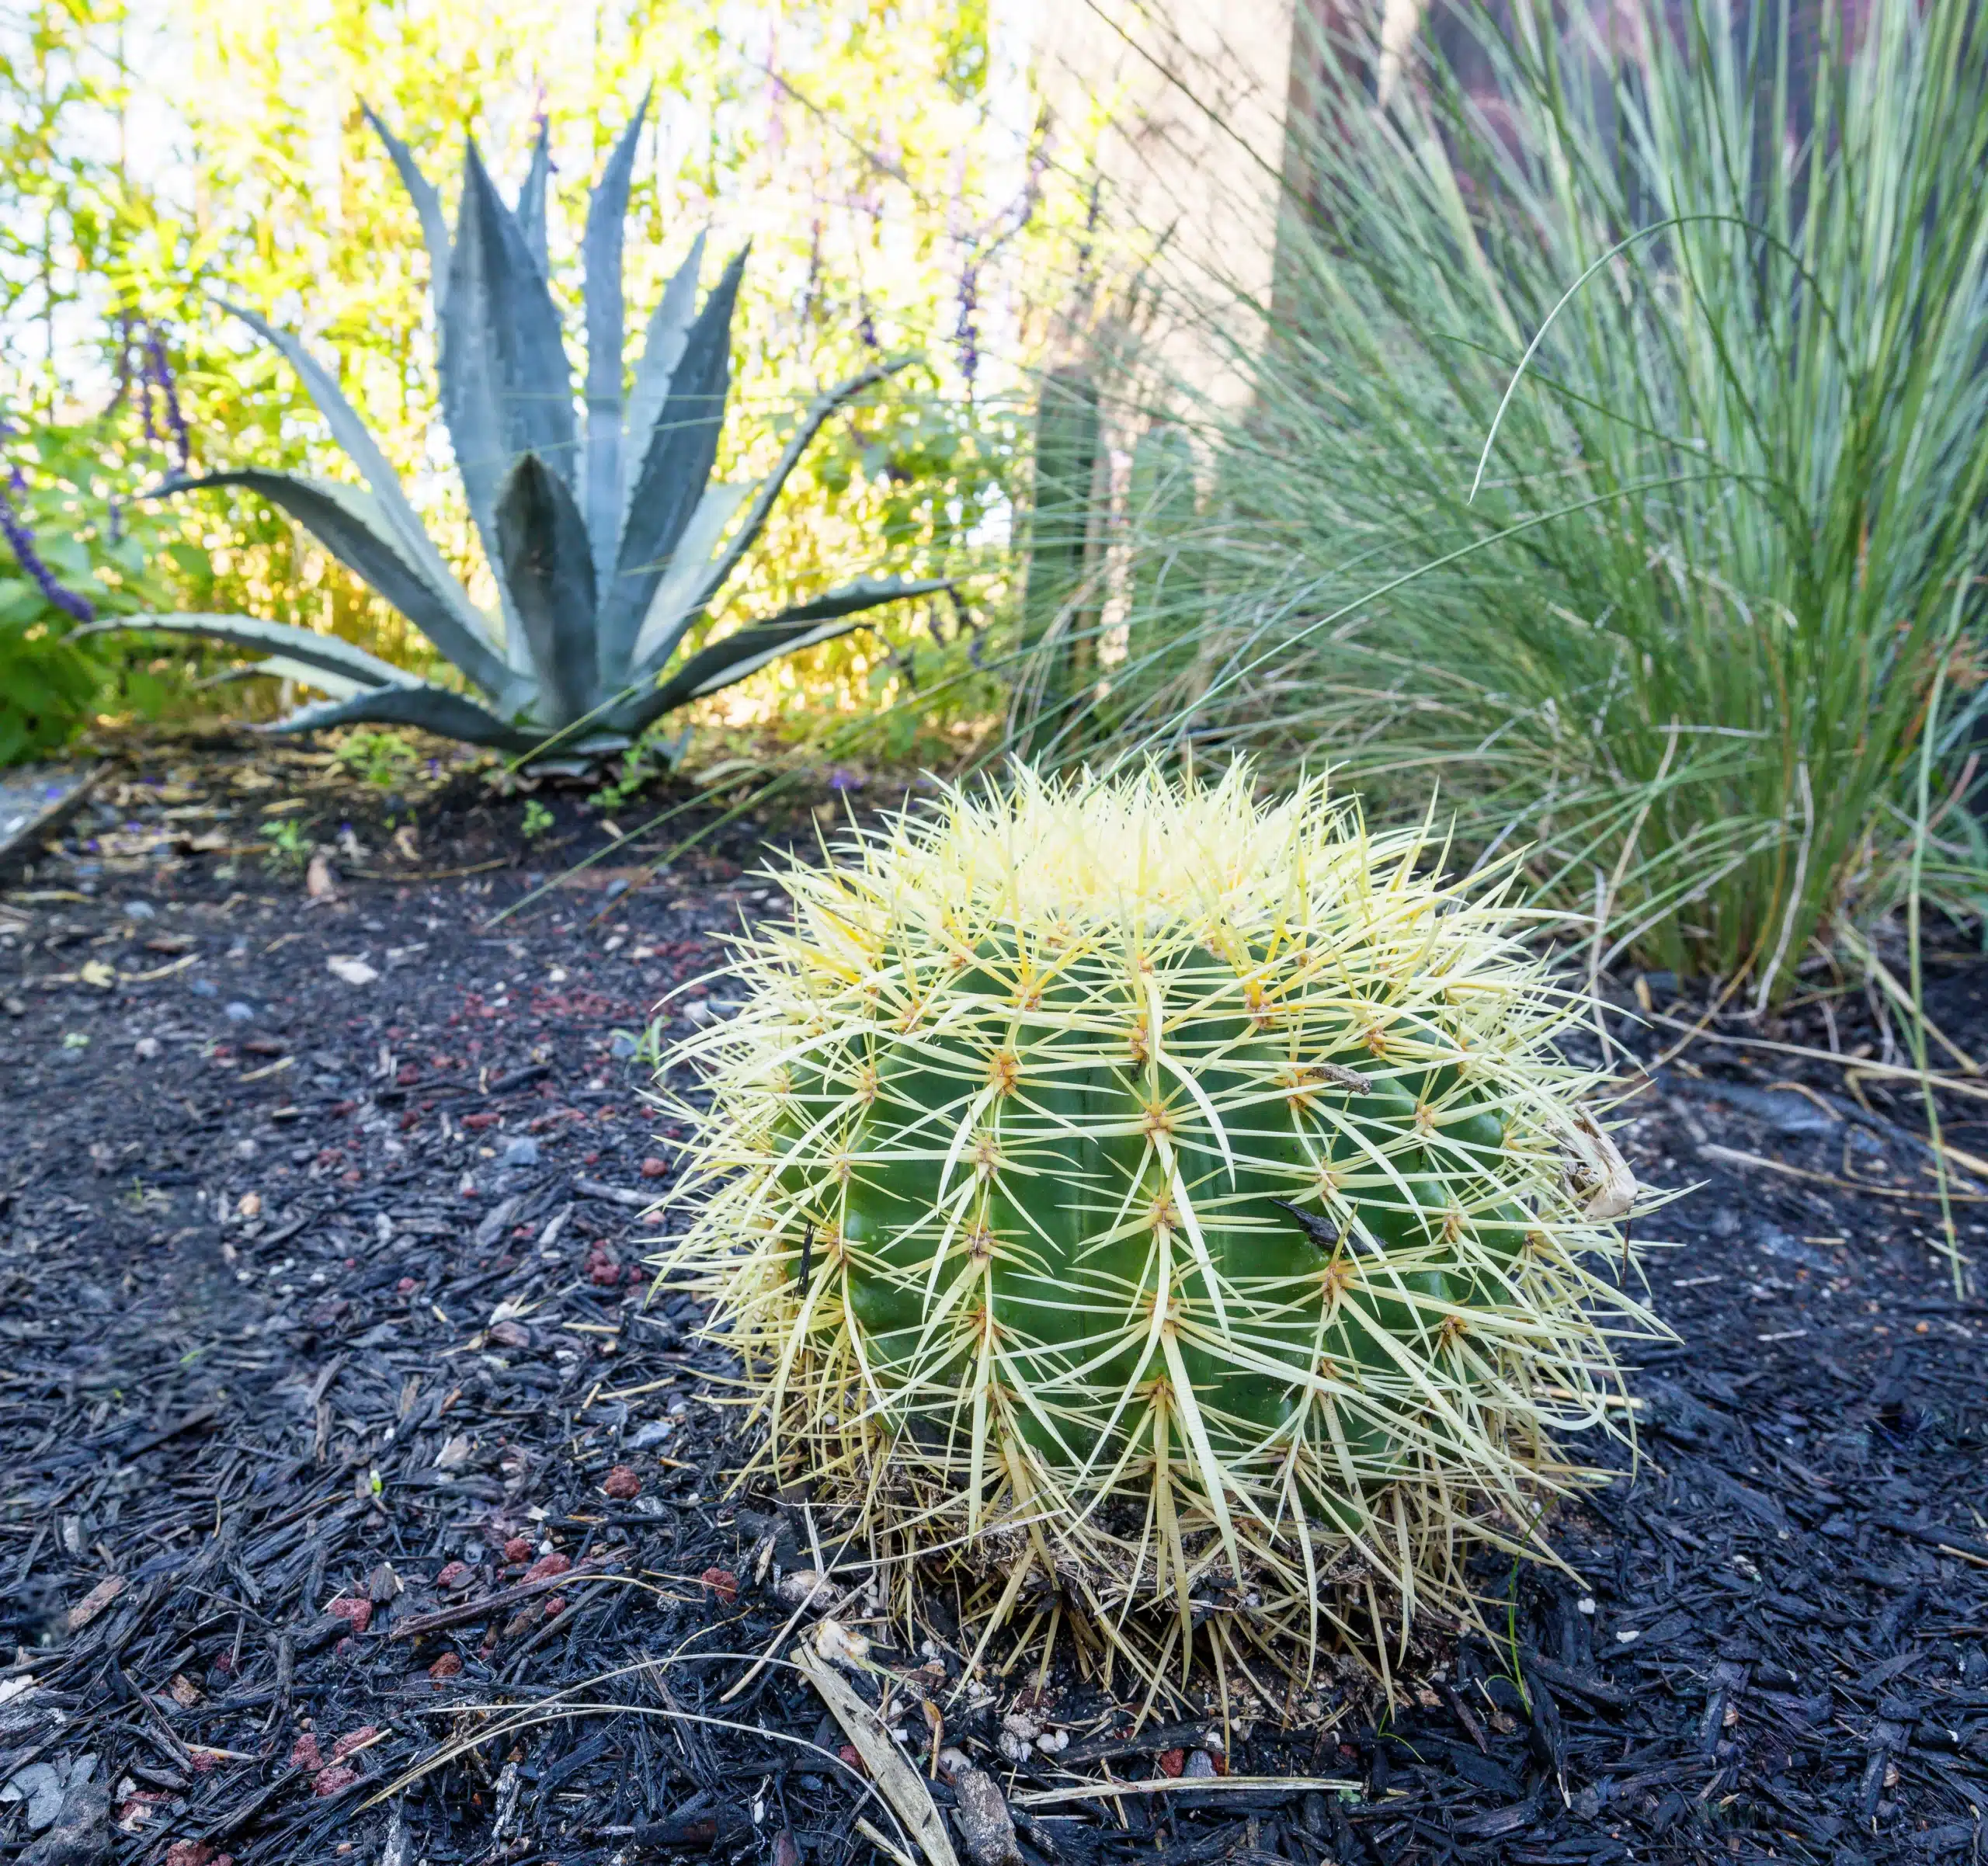 close up of round cactus with native grasses and yucca plants